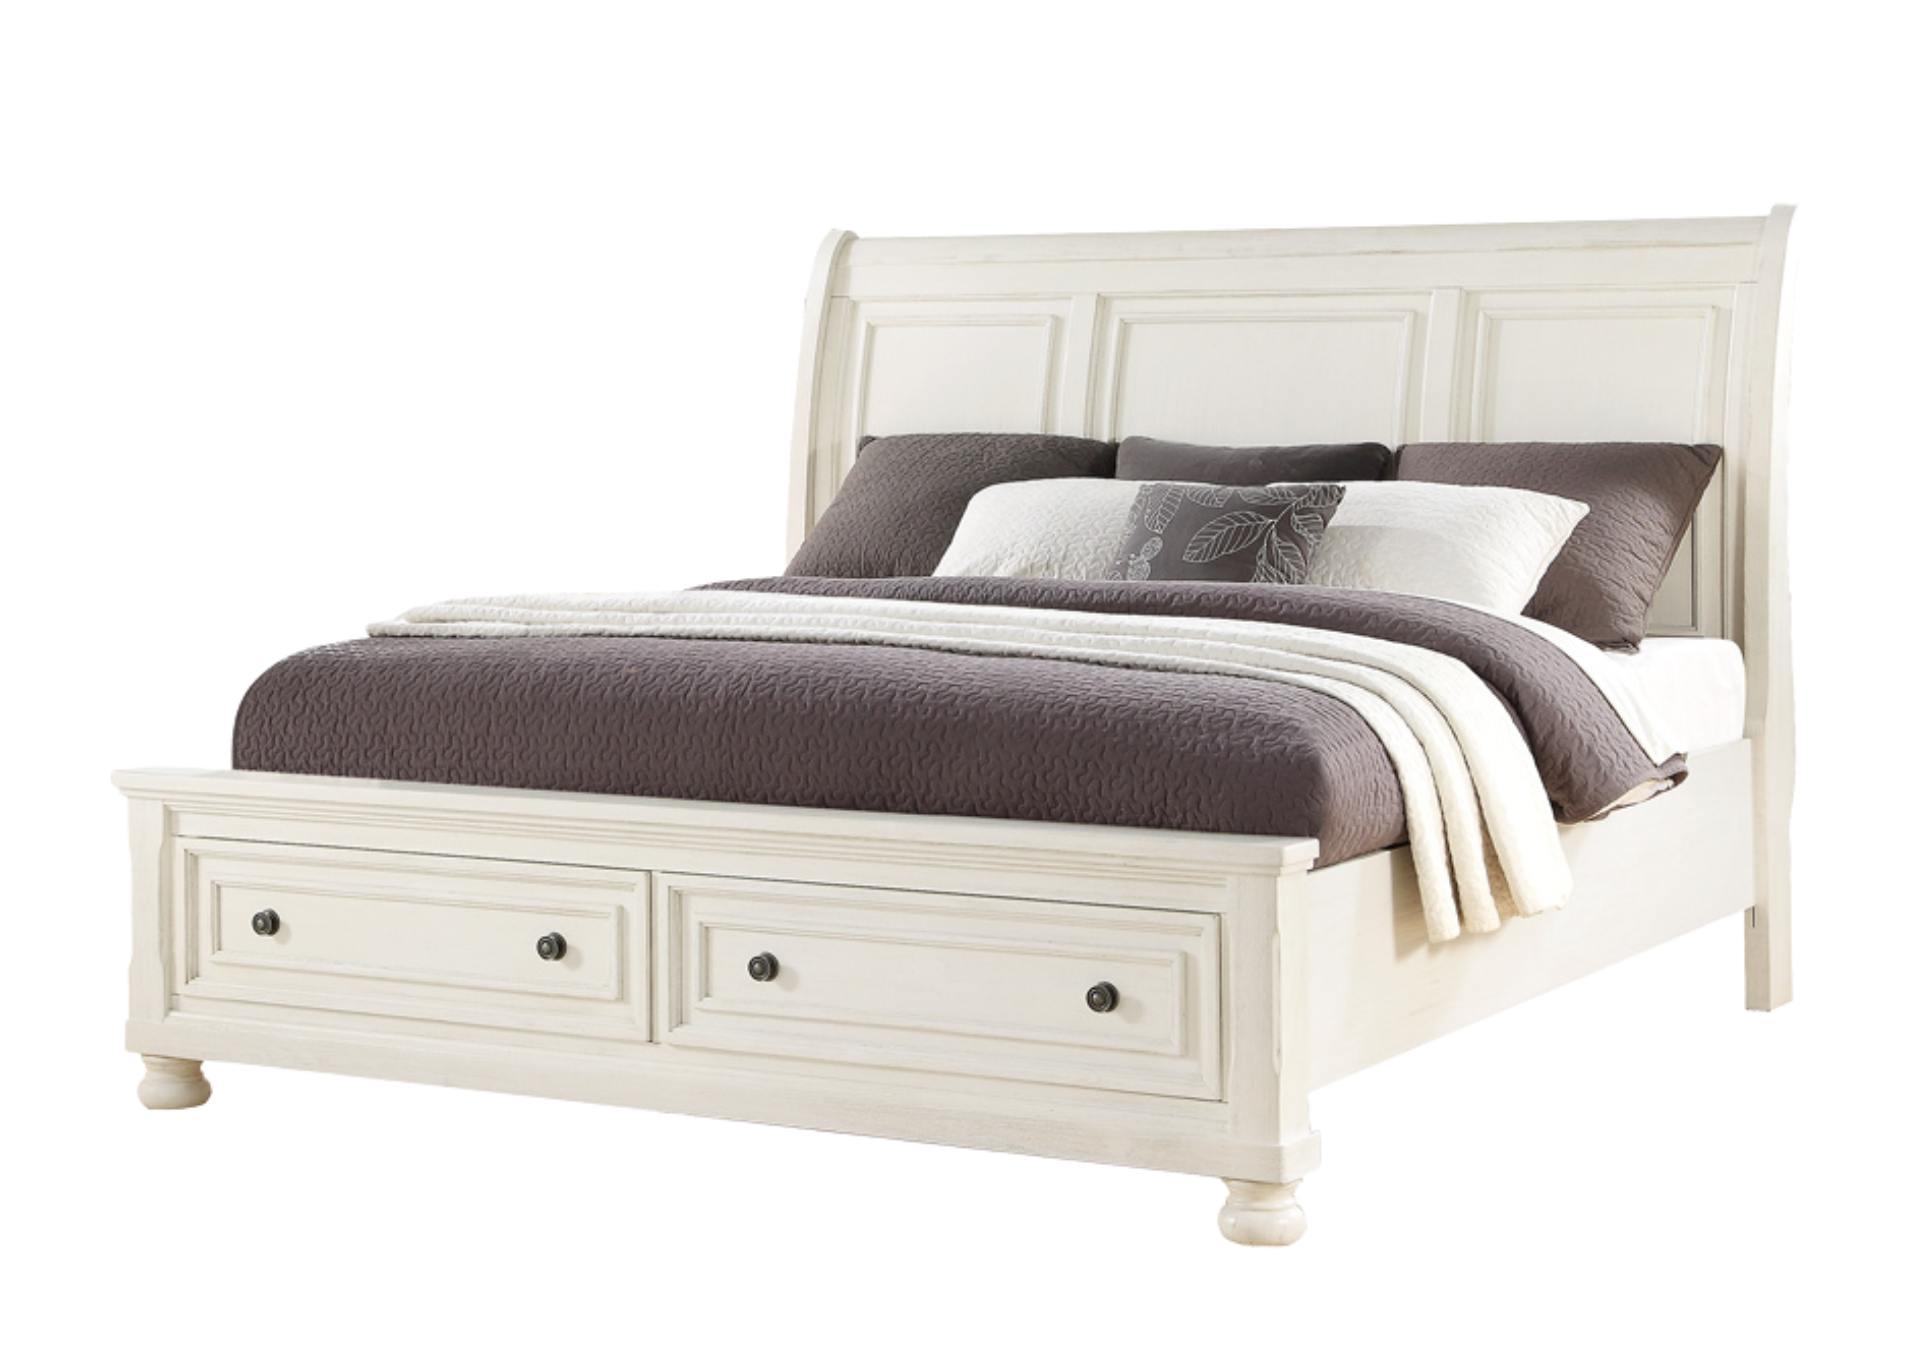 KINGSMAN WHITE QUEEN BED,AVALON FURNITURE